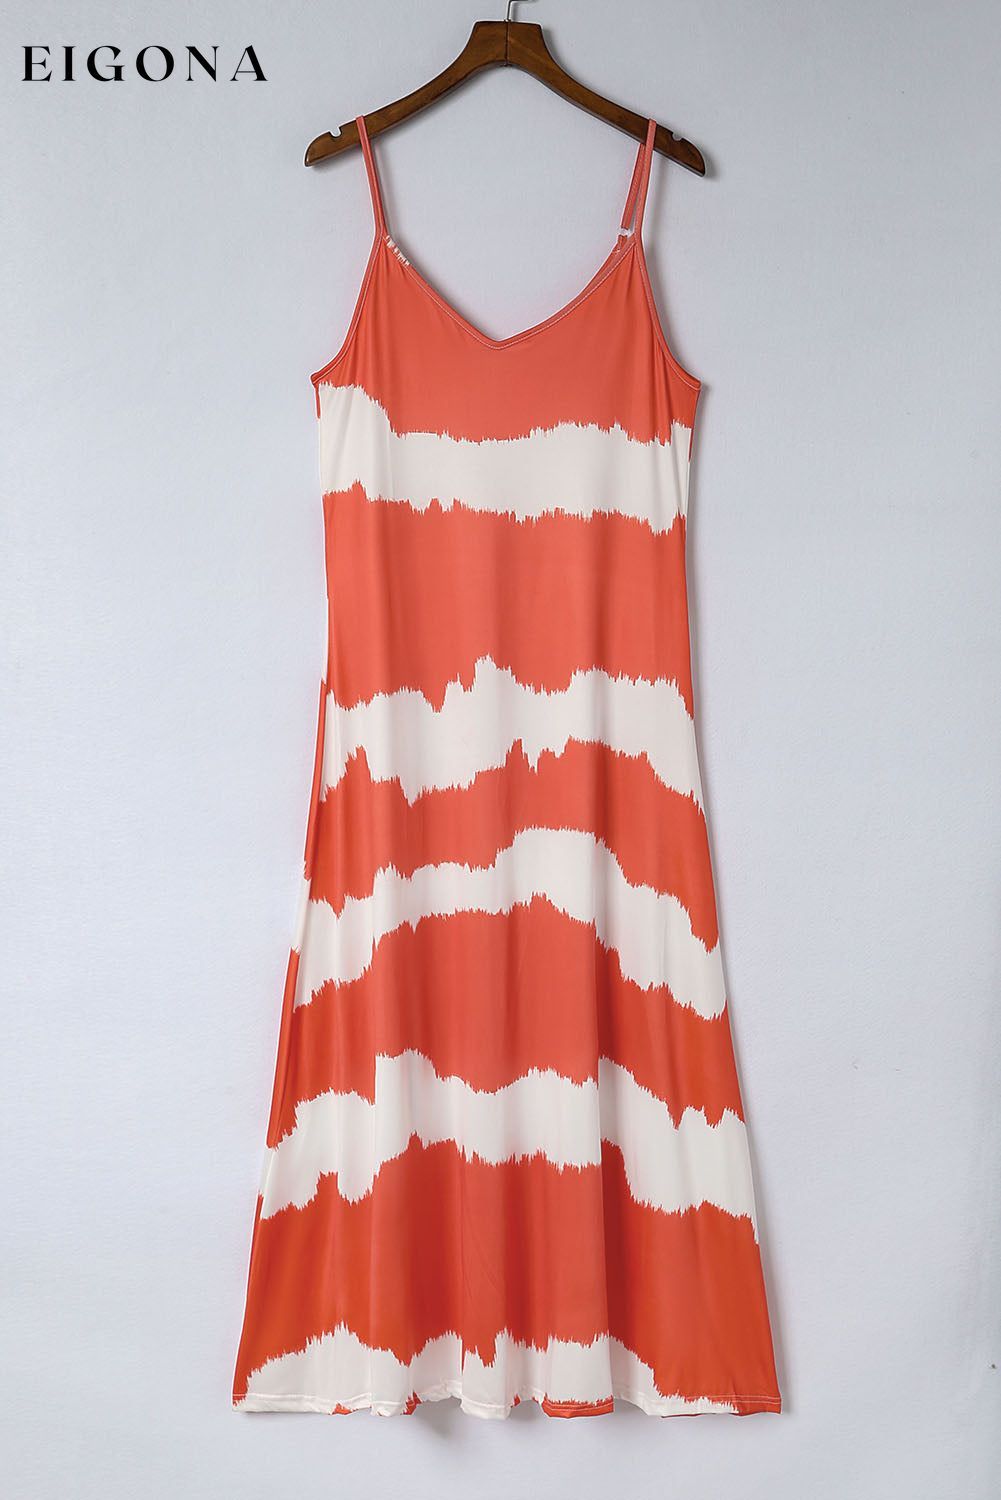 Orange Tie Dye Striped Spaghetti Straps Maxi Dress clothes Craft Tie Dye DL Mediterranean dress dresses Occasion Vacation Print Color Block Season Summer Size S To 2XL Sleeve Sleeveless Style Casual